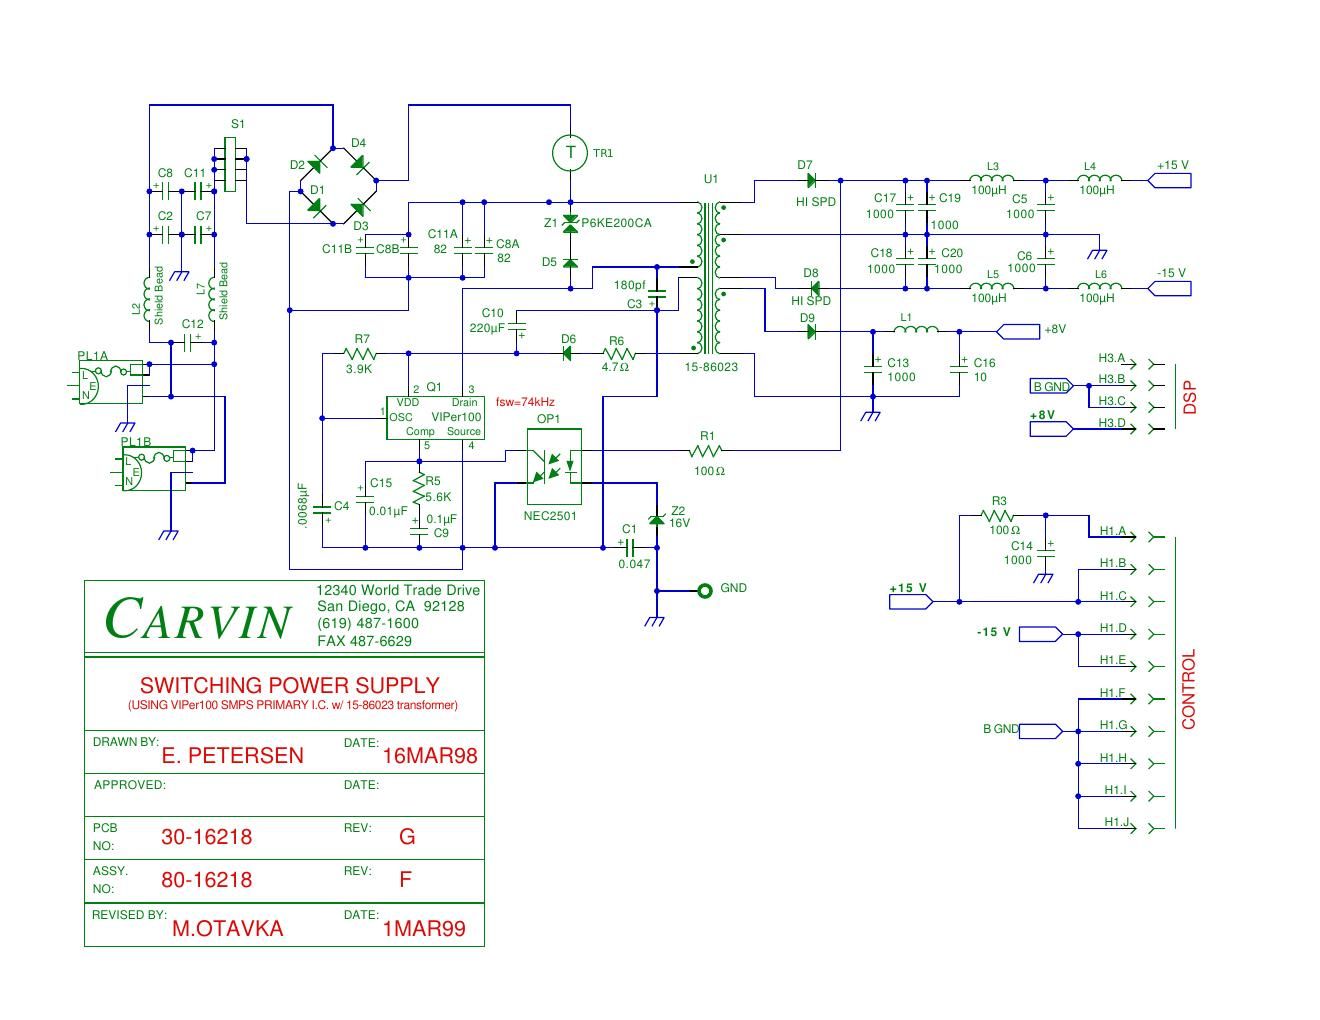 carvin switchmode power supply rev g schematic